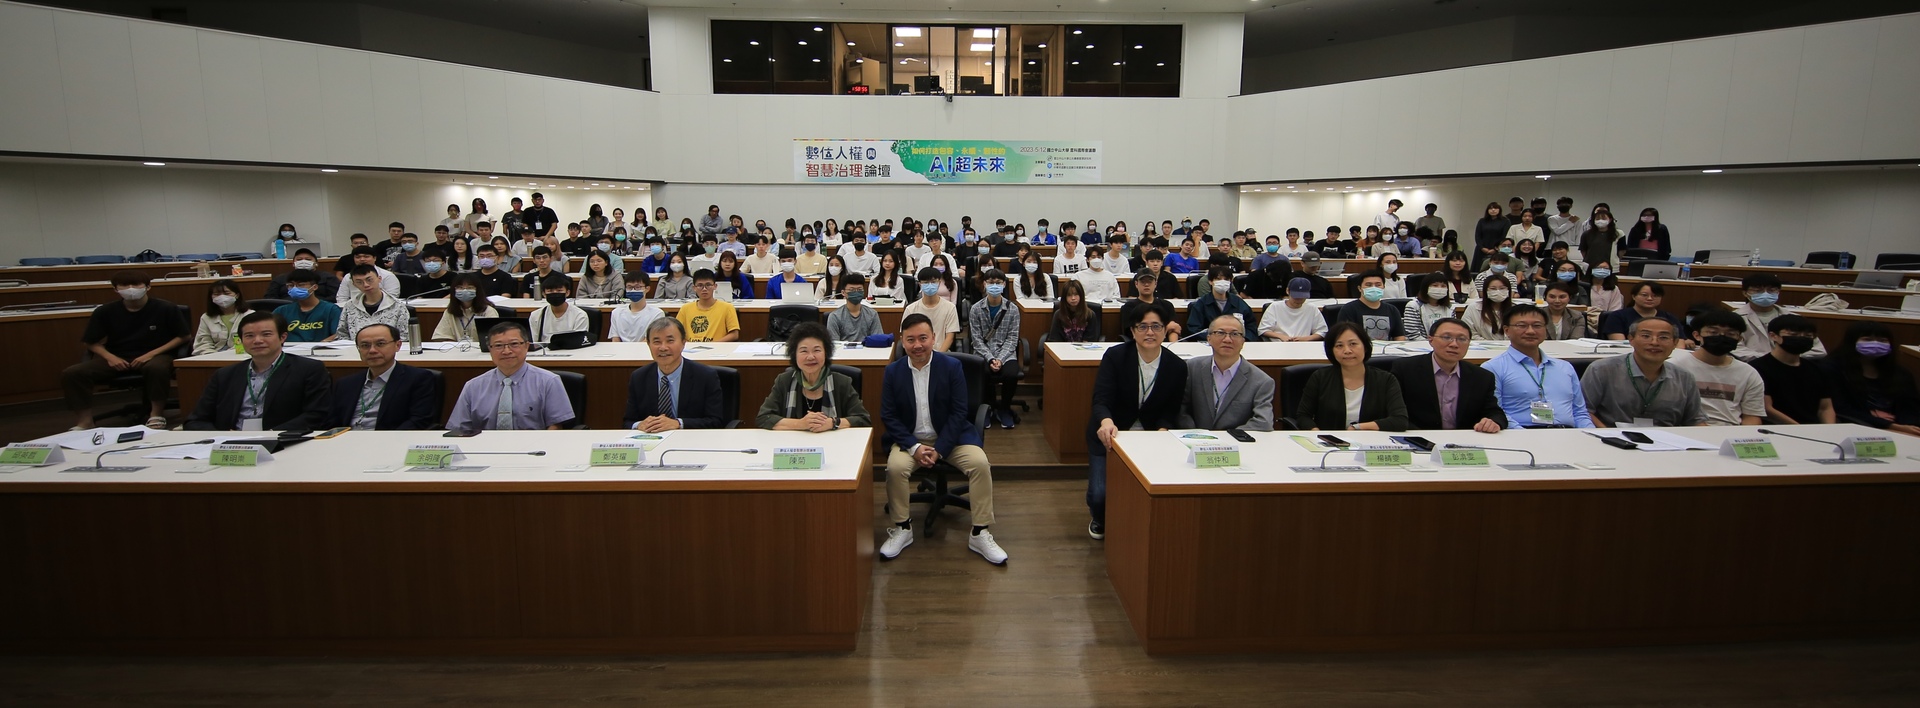 Different fields of experts discussed the opportunities and challenges in the era of rapid AI development from their perspectives in the inaugural Digital Human Rights and AI Governance Forum in South Taiwan. Including students and external participants, more than 300 attendees participated in the forum.